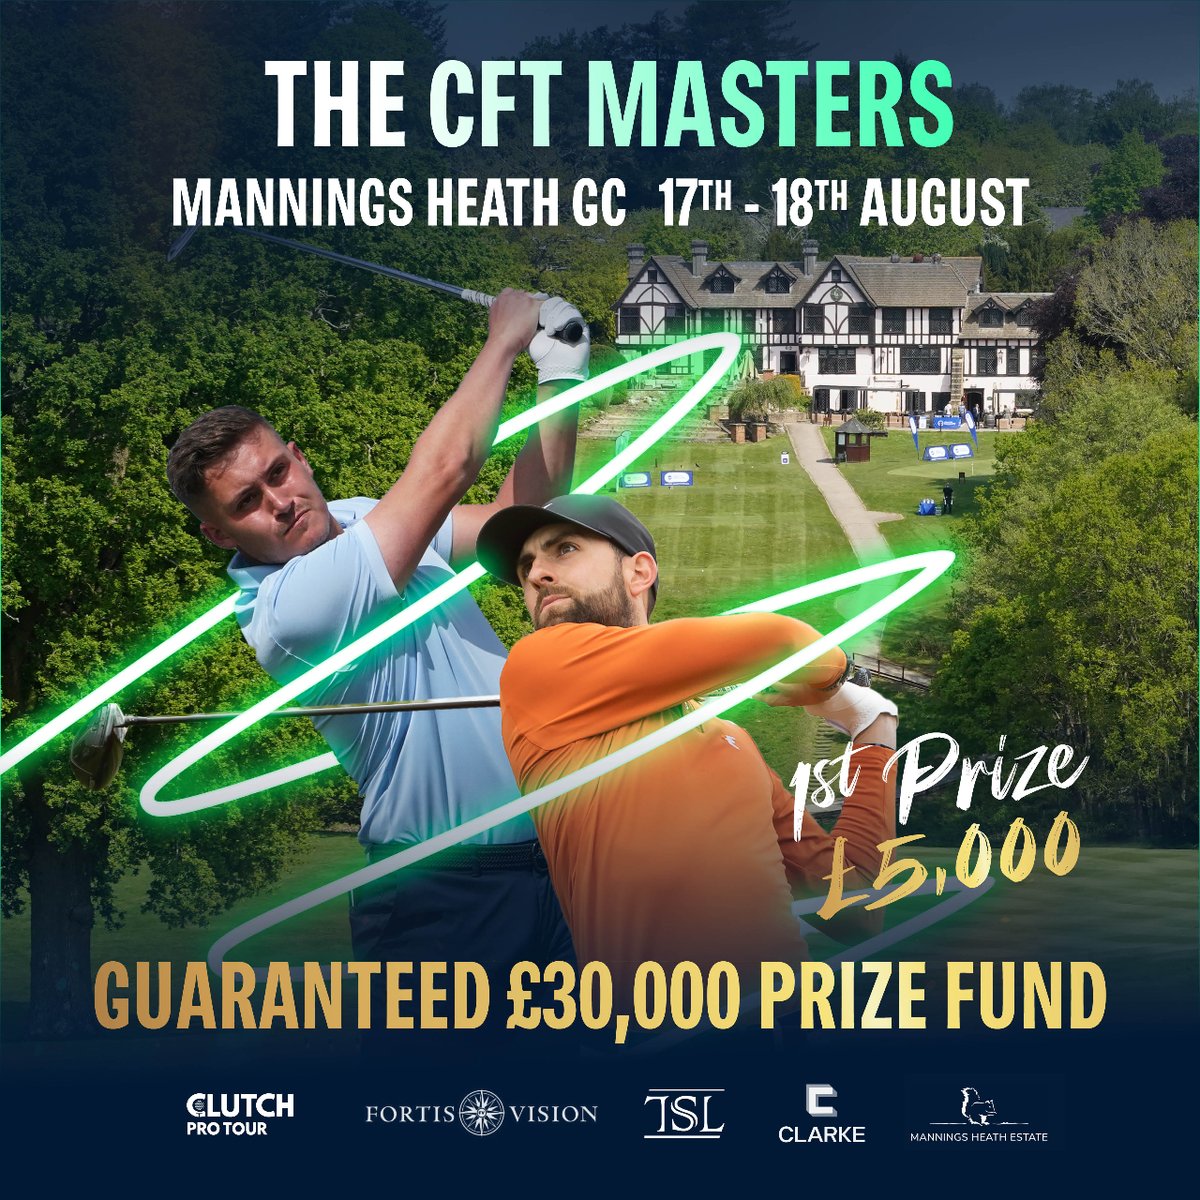 Be sure to come and watch the CFT at Manning's Heath Estate this August. Spectate and support the players, see who manages to swing the 1st Prize and enjoy a brilliant few days of golf with us. Find out more 👉 manningsheath.com/all-events/clu…